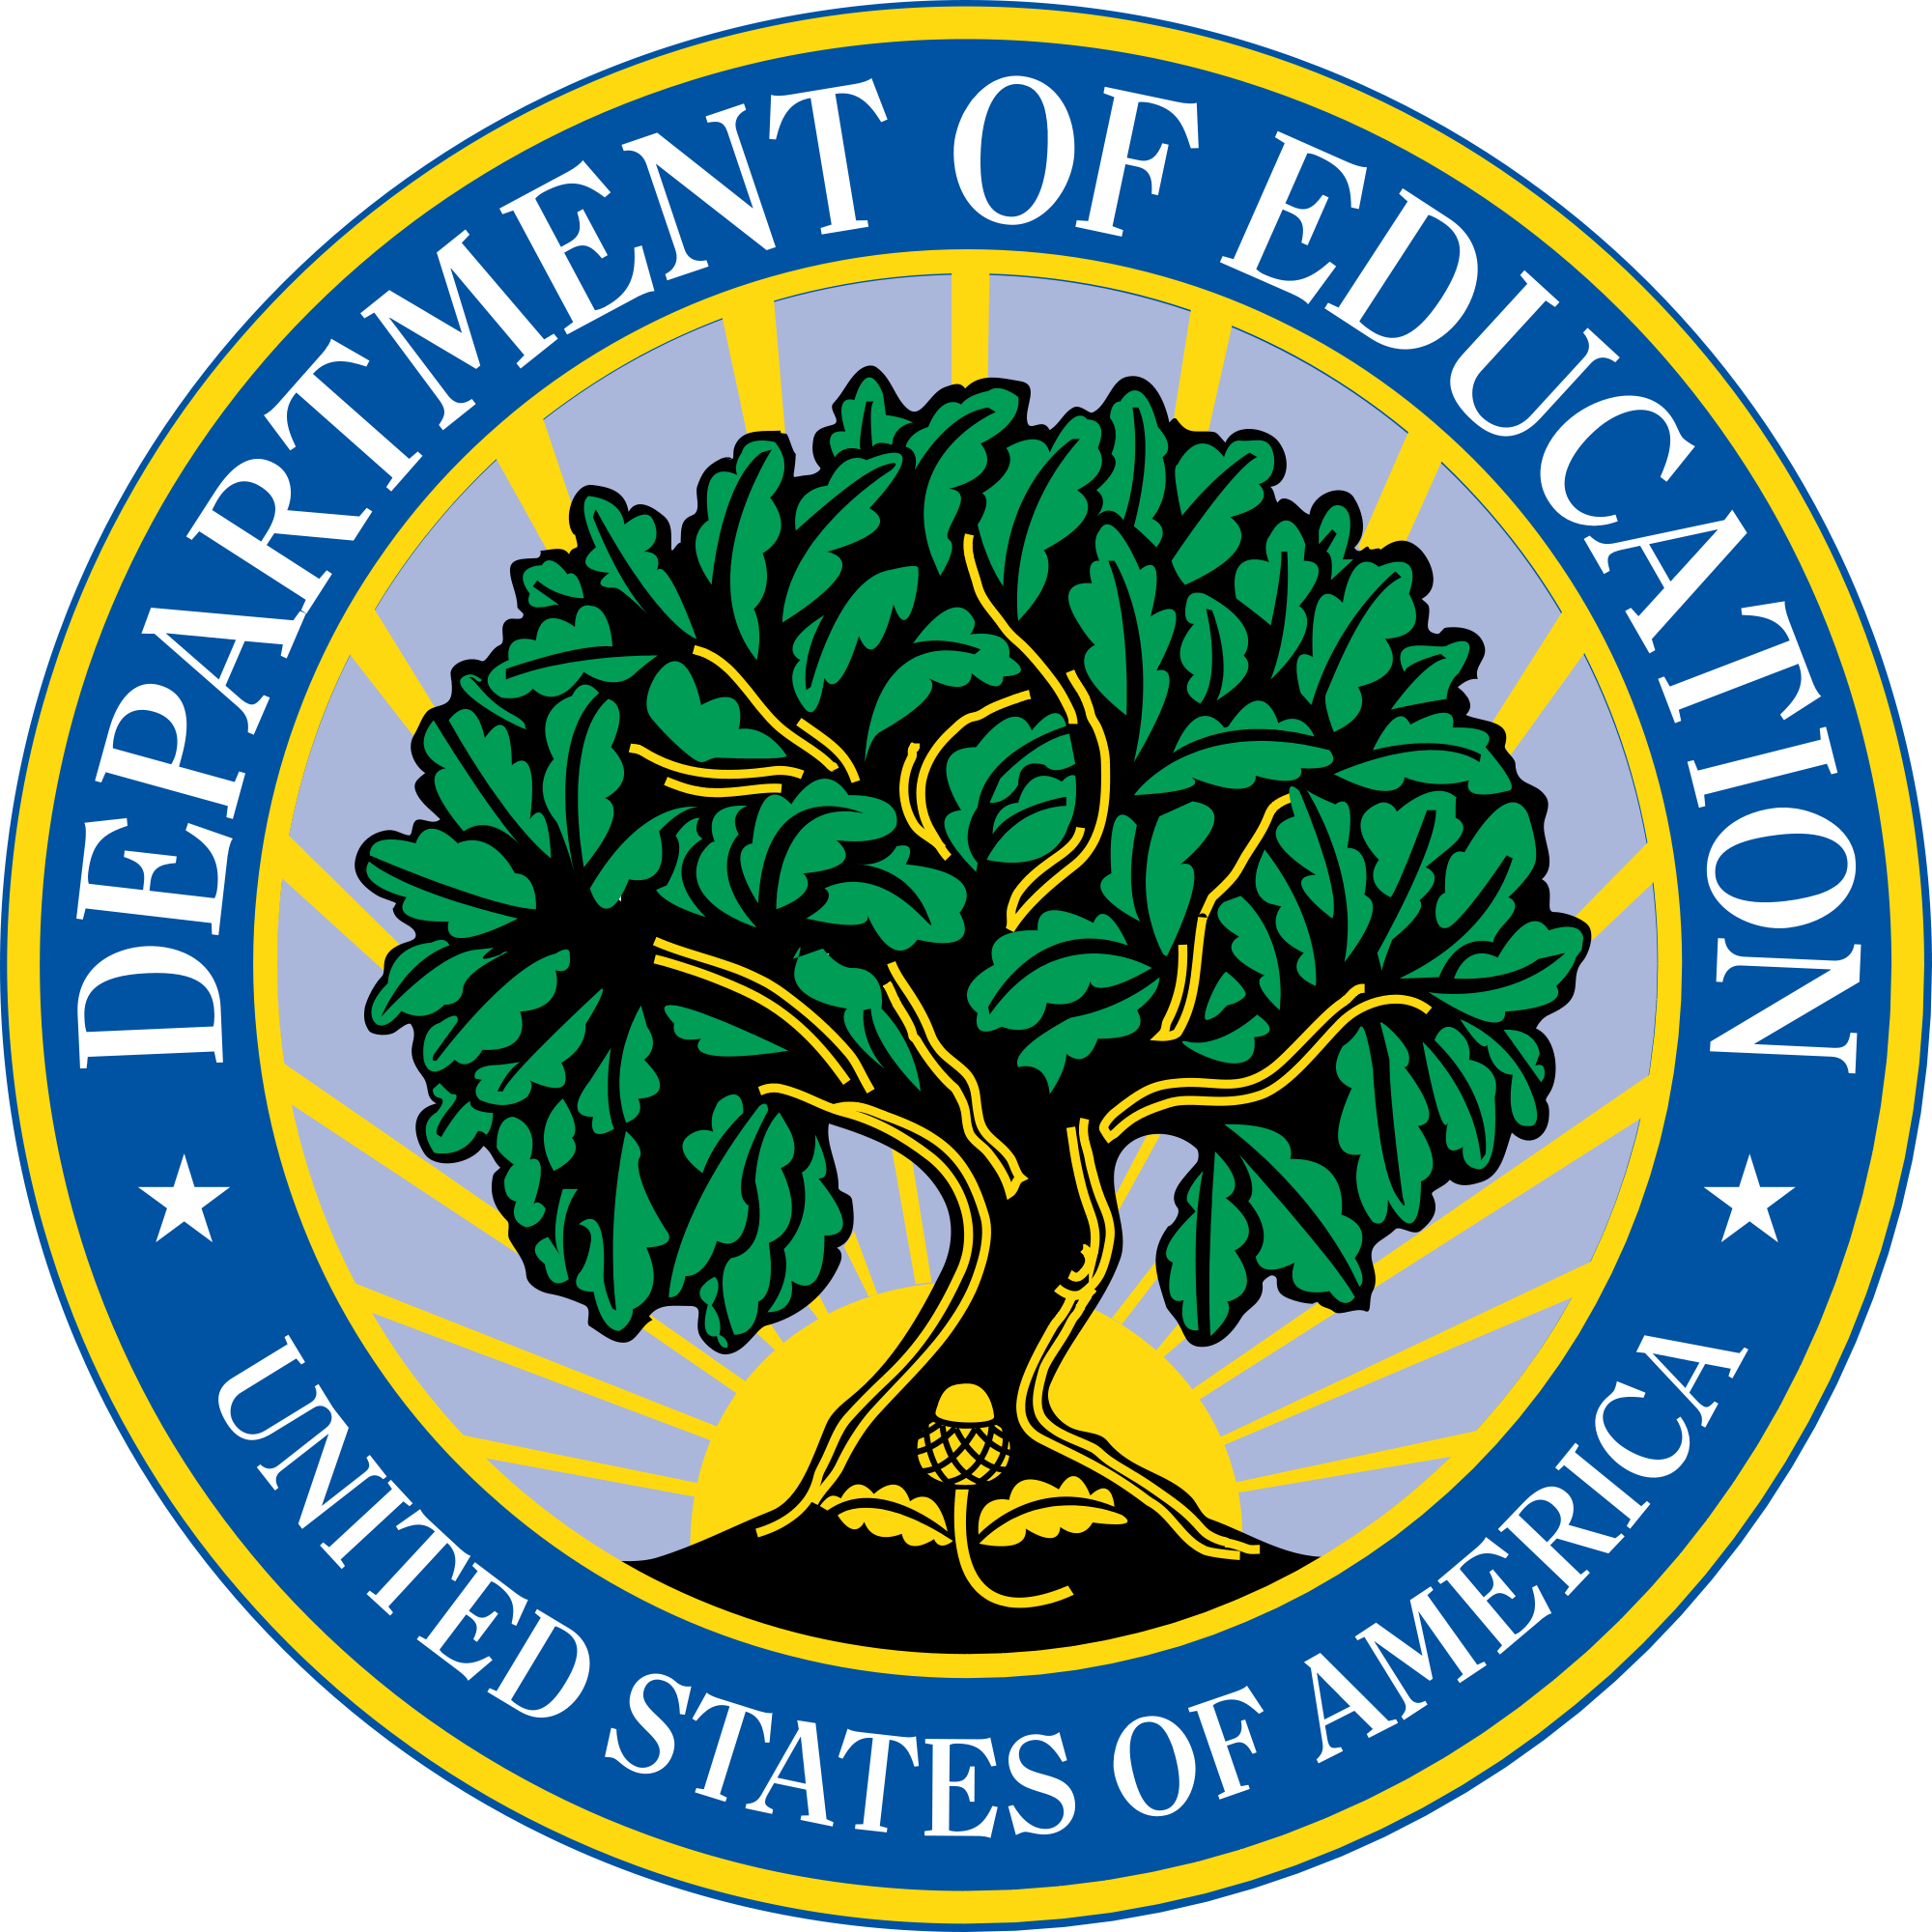 Trinity School of Medicine congratulates St. Vincent on US Department of Education Recognition